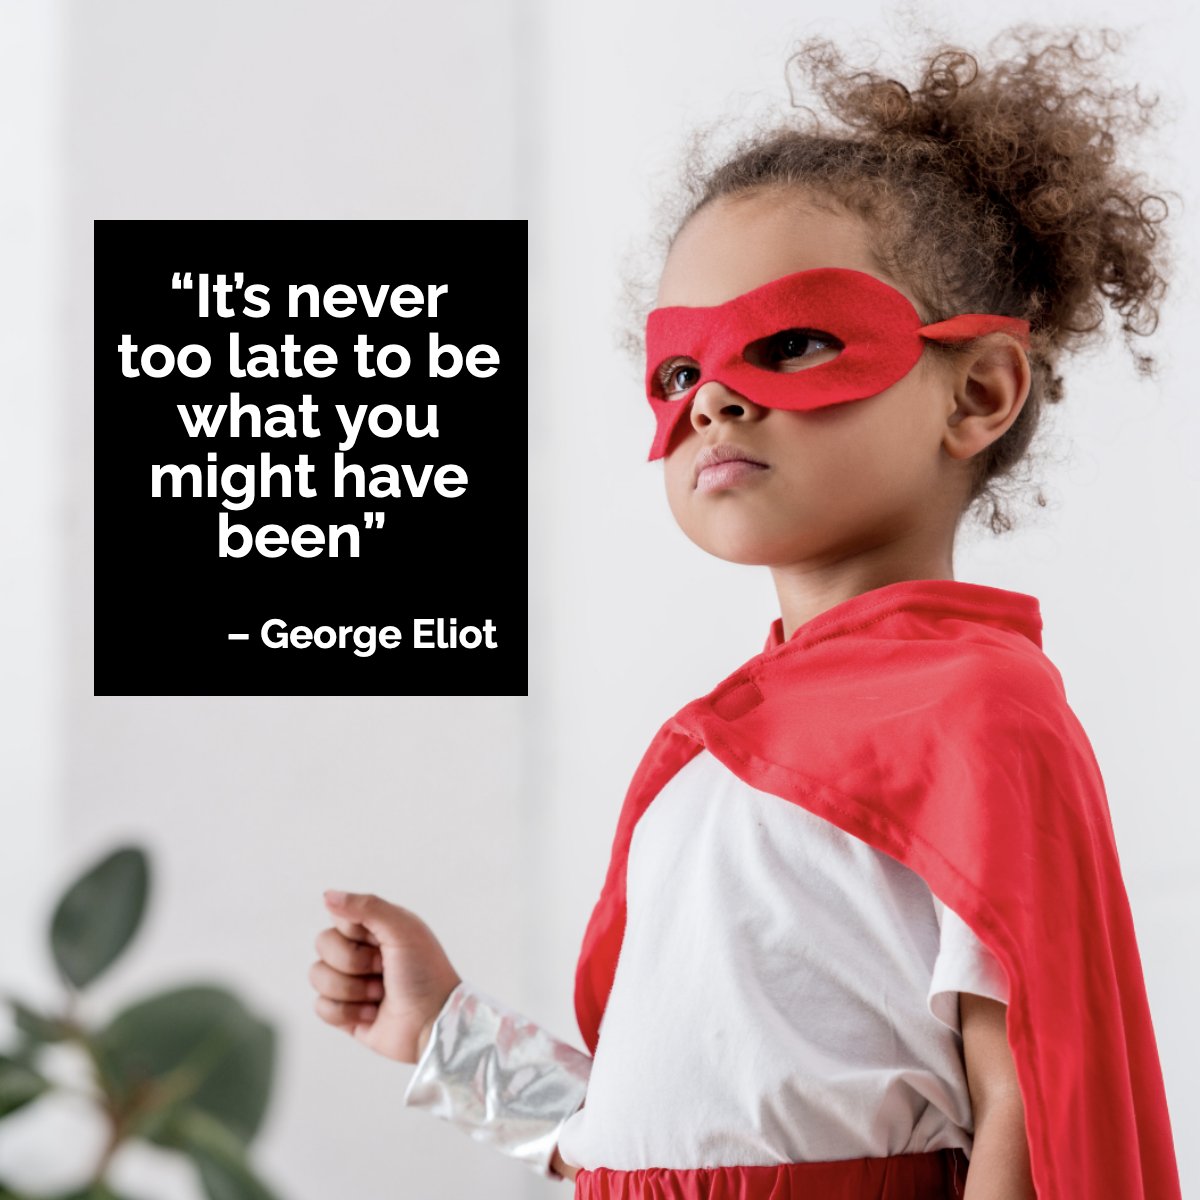 'It's never too late to be what you might have been'

#inspiring #inspirational #quote #quoteoftheday✏️ #quotestagram
 #YourPerfectHome #CRayBrower #SanJoaquinCounty #StocktonCA #RealEstate